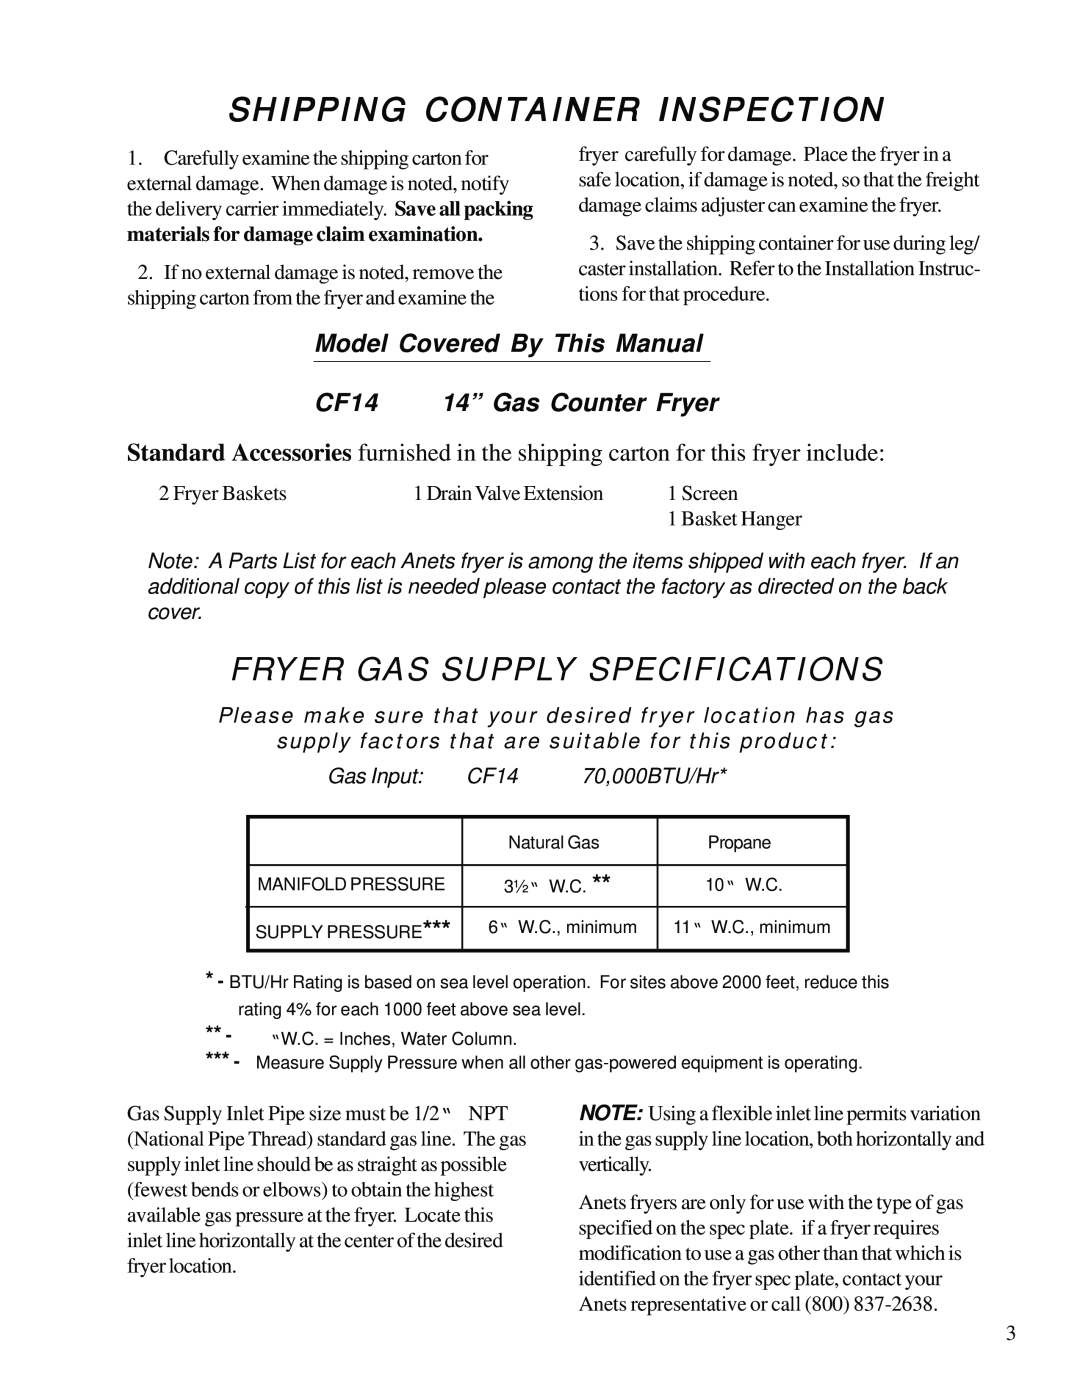 Anetsberger Brothers CF14 Shipping Container Inspection, Fryer Gas Supply Specifications, Model Covered By This Manual 